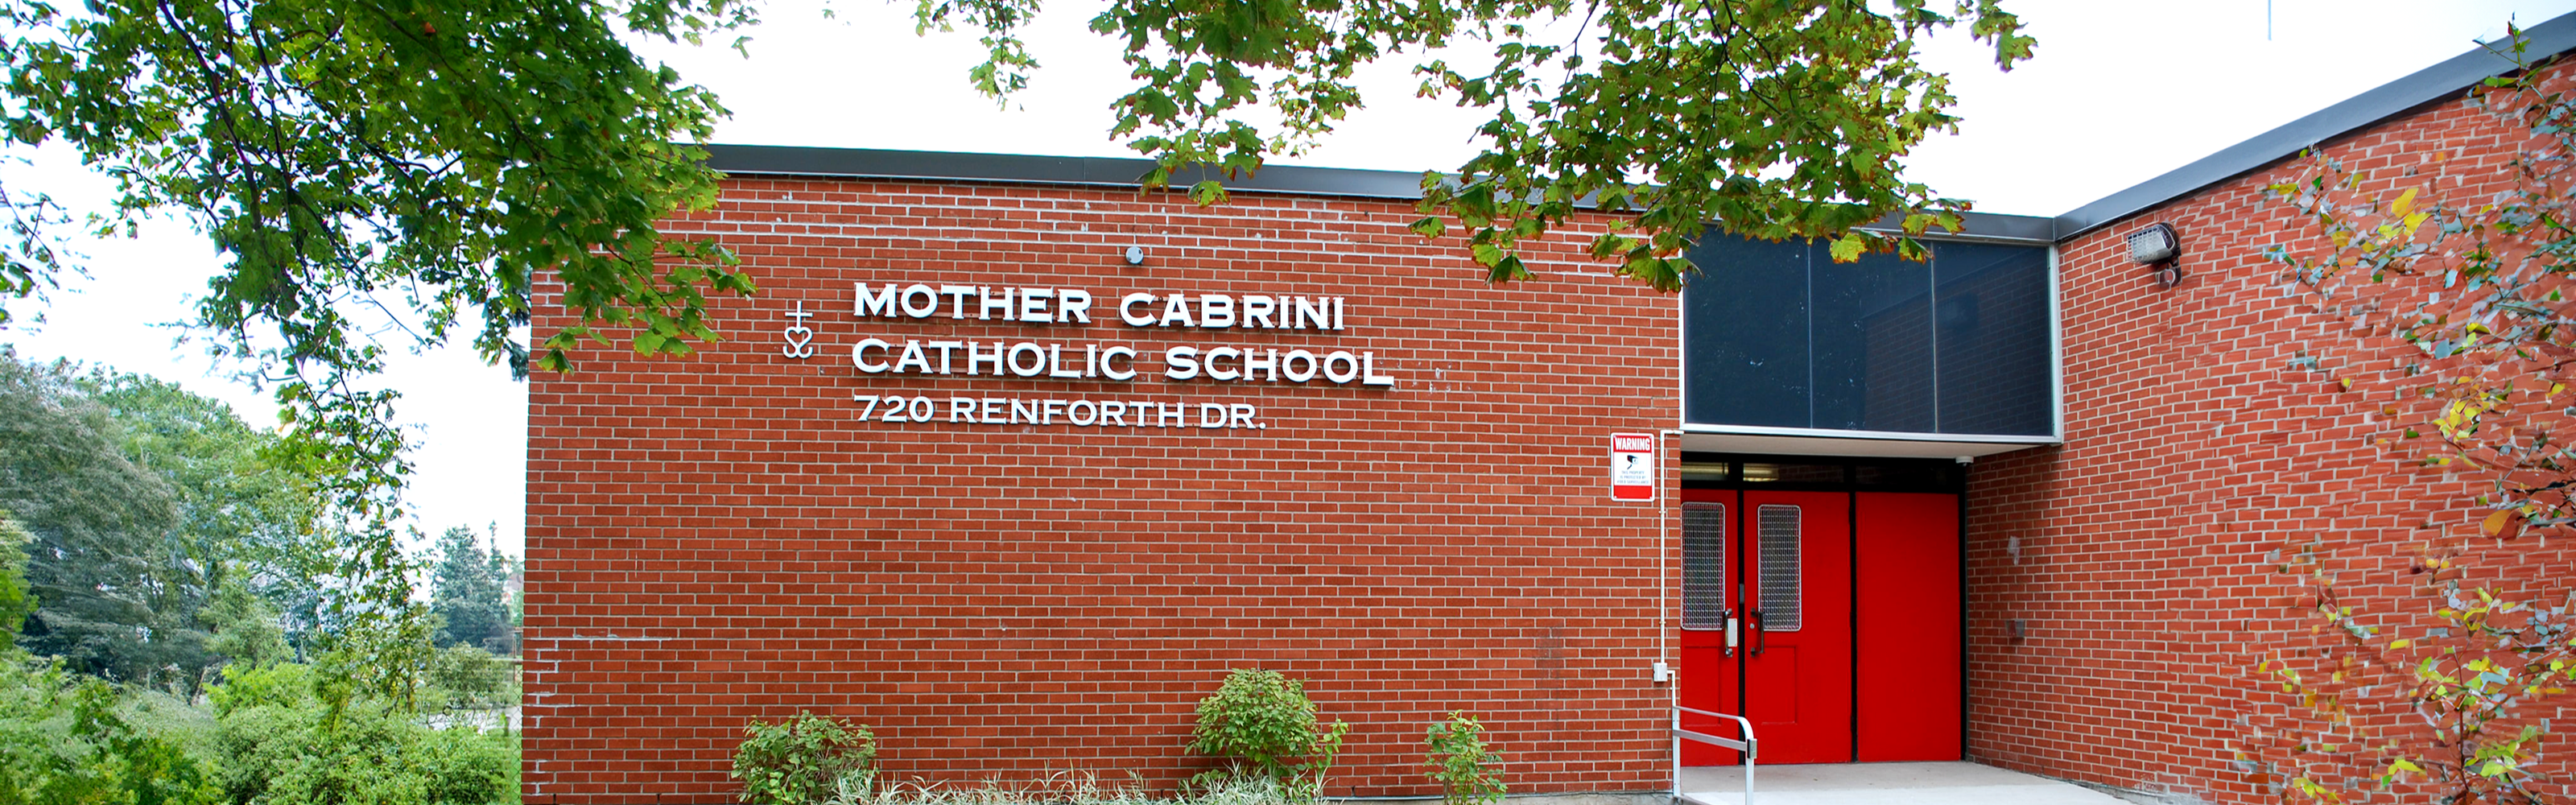 The front of the Mother Cabrini Catholic School building.